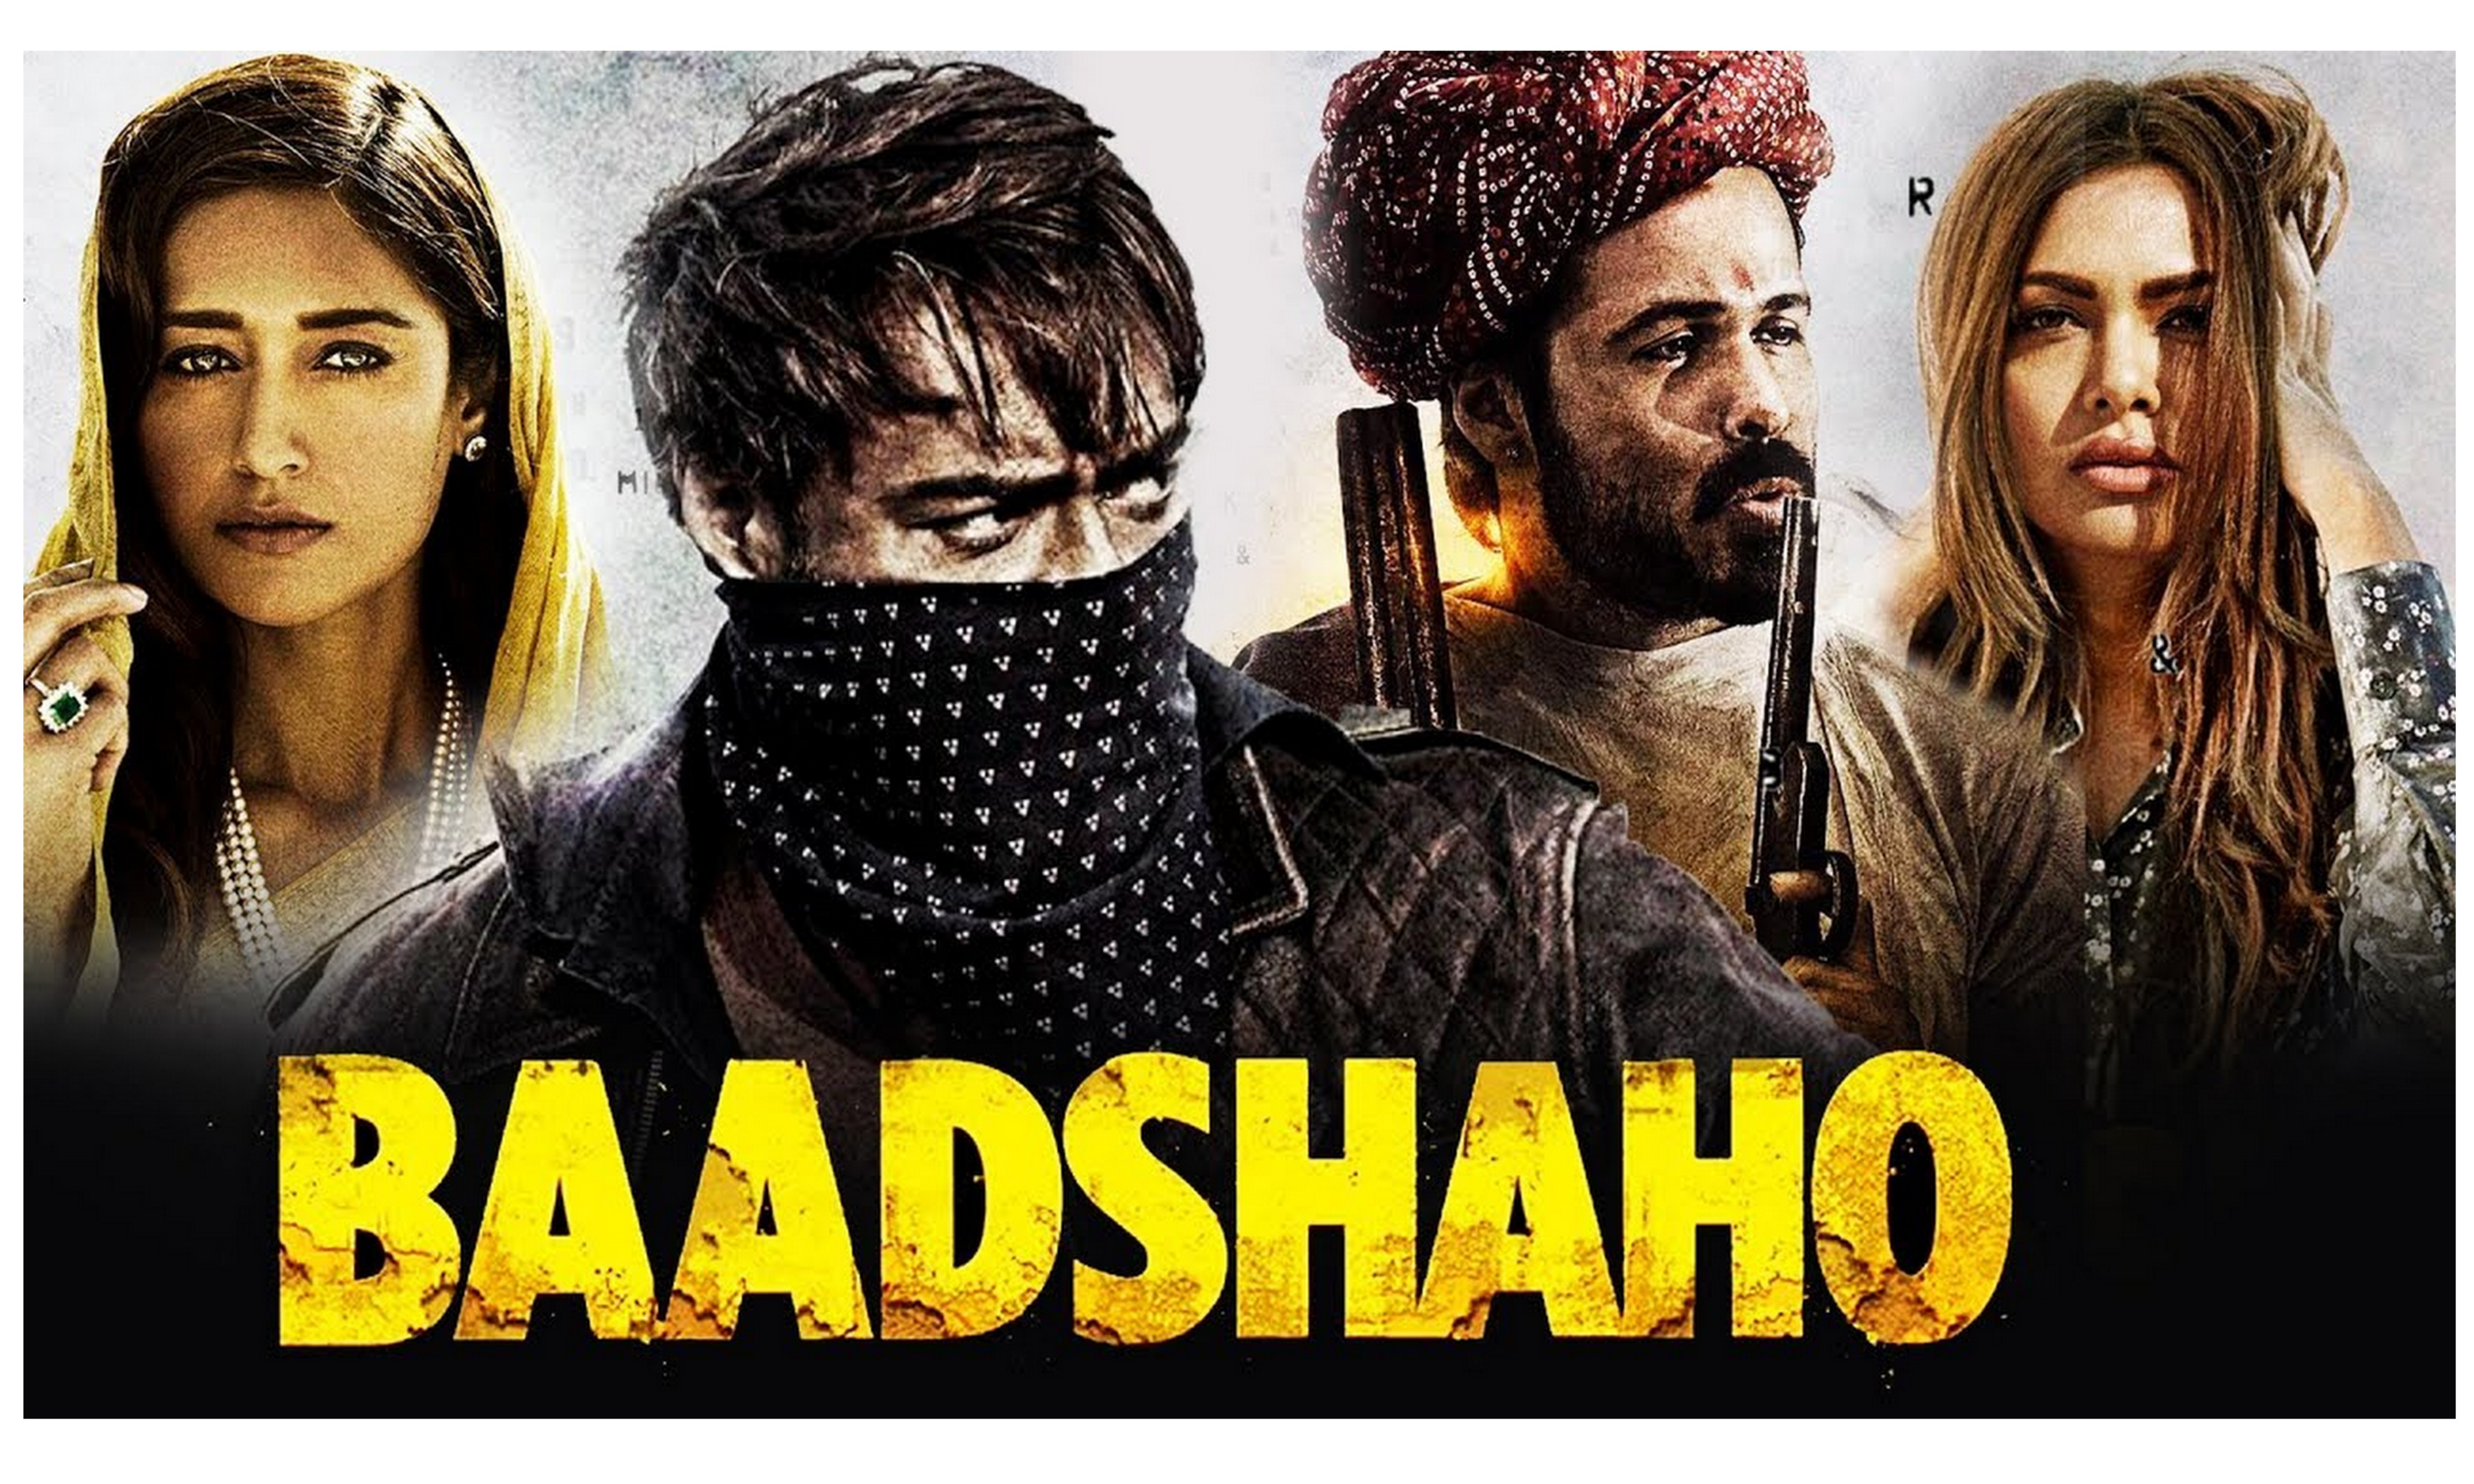 ‘Baadshaho’ Box Office collection reaches Rs 64 crore on 7th day!